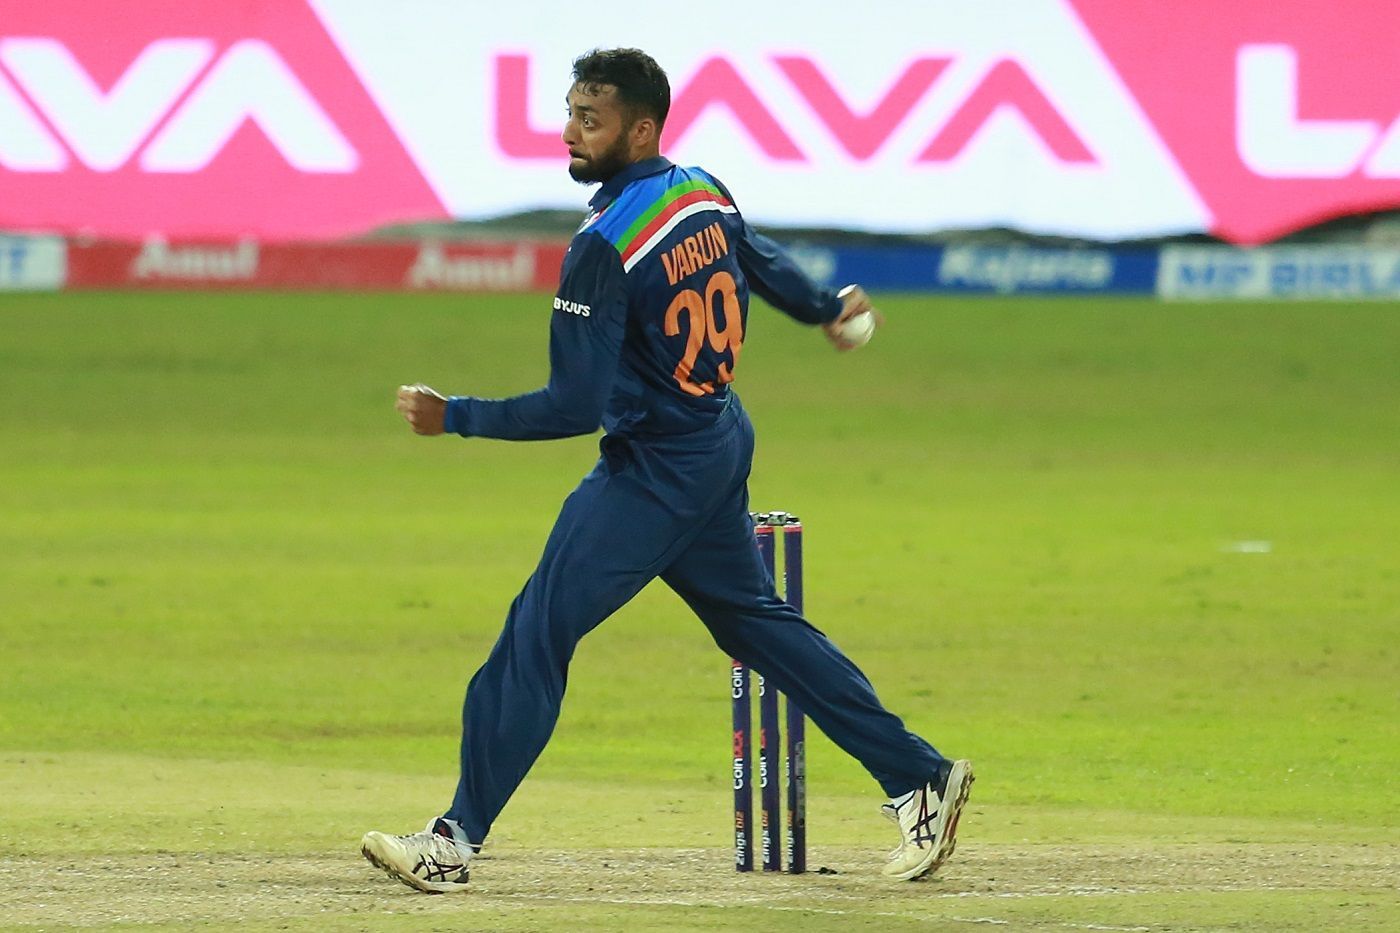 If he manages to stay injury-free, Chakravarthy can have a great World Cup for India.